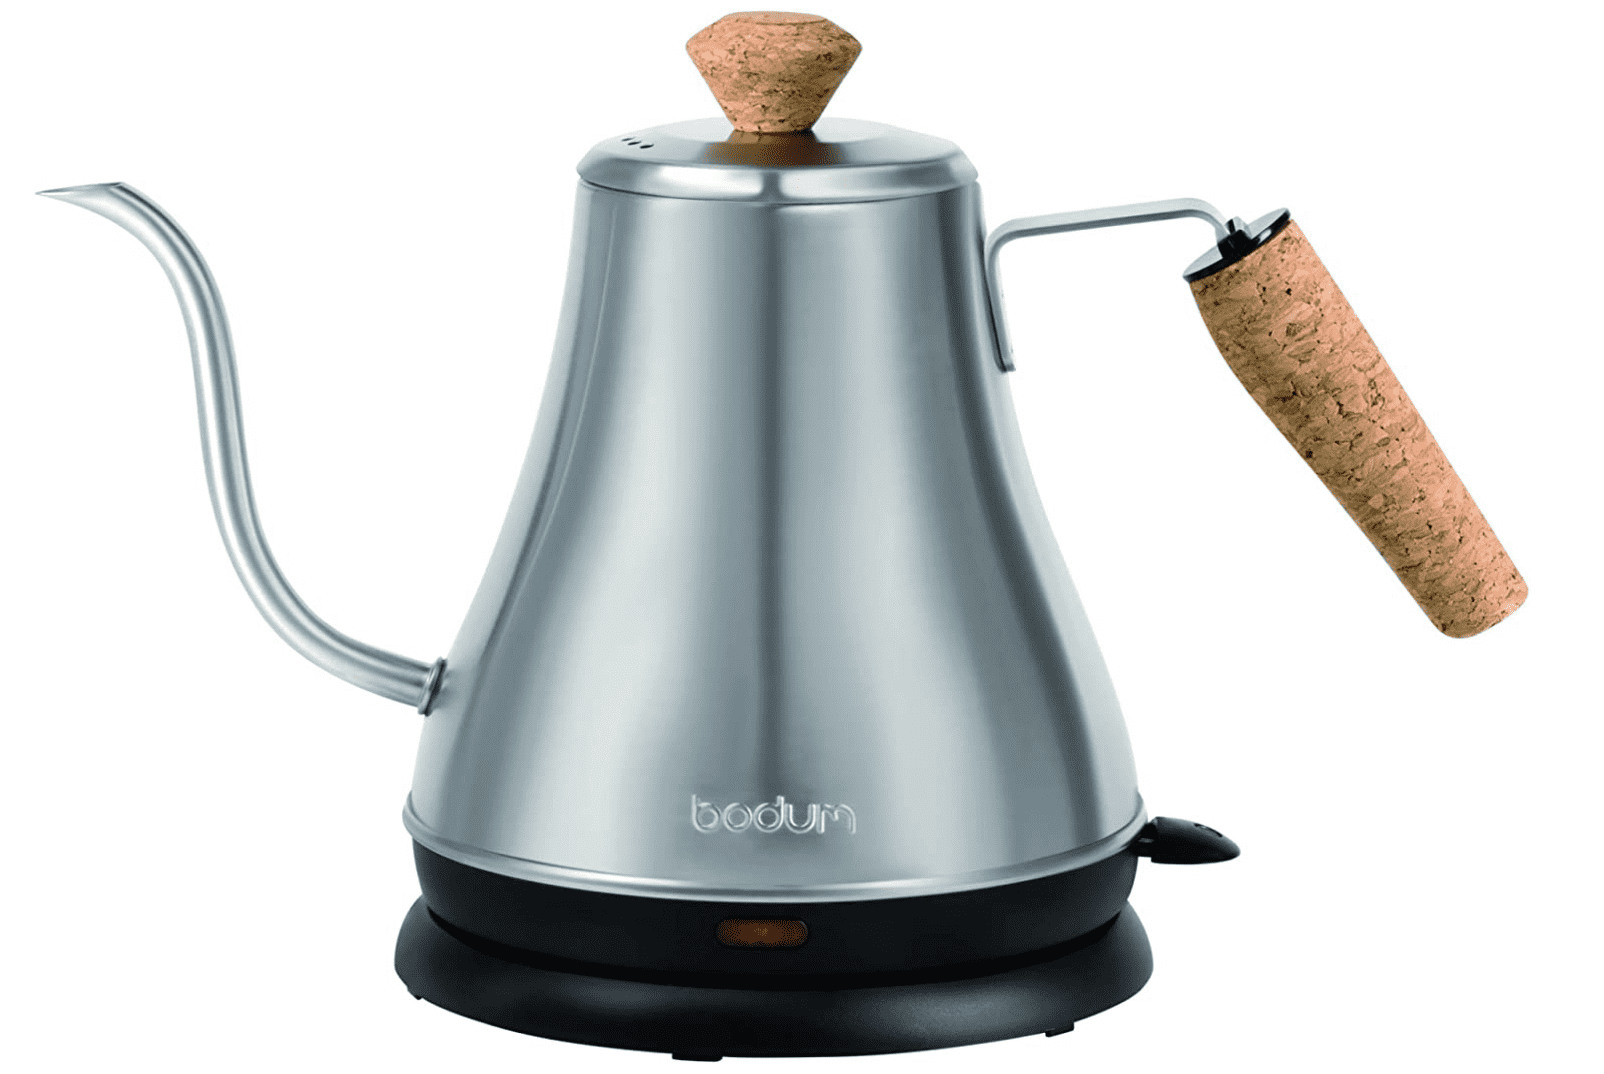 Bodum's fascinating electric kettle is the perfect conversation